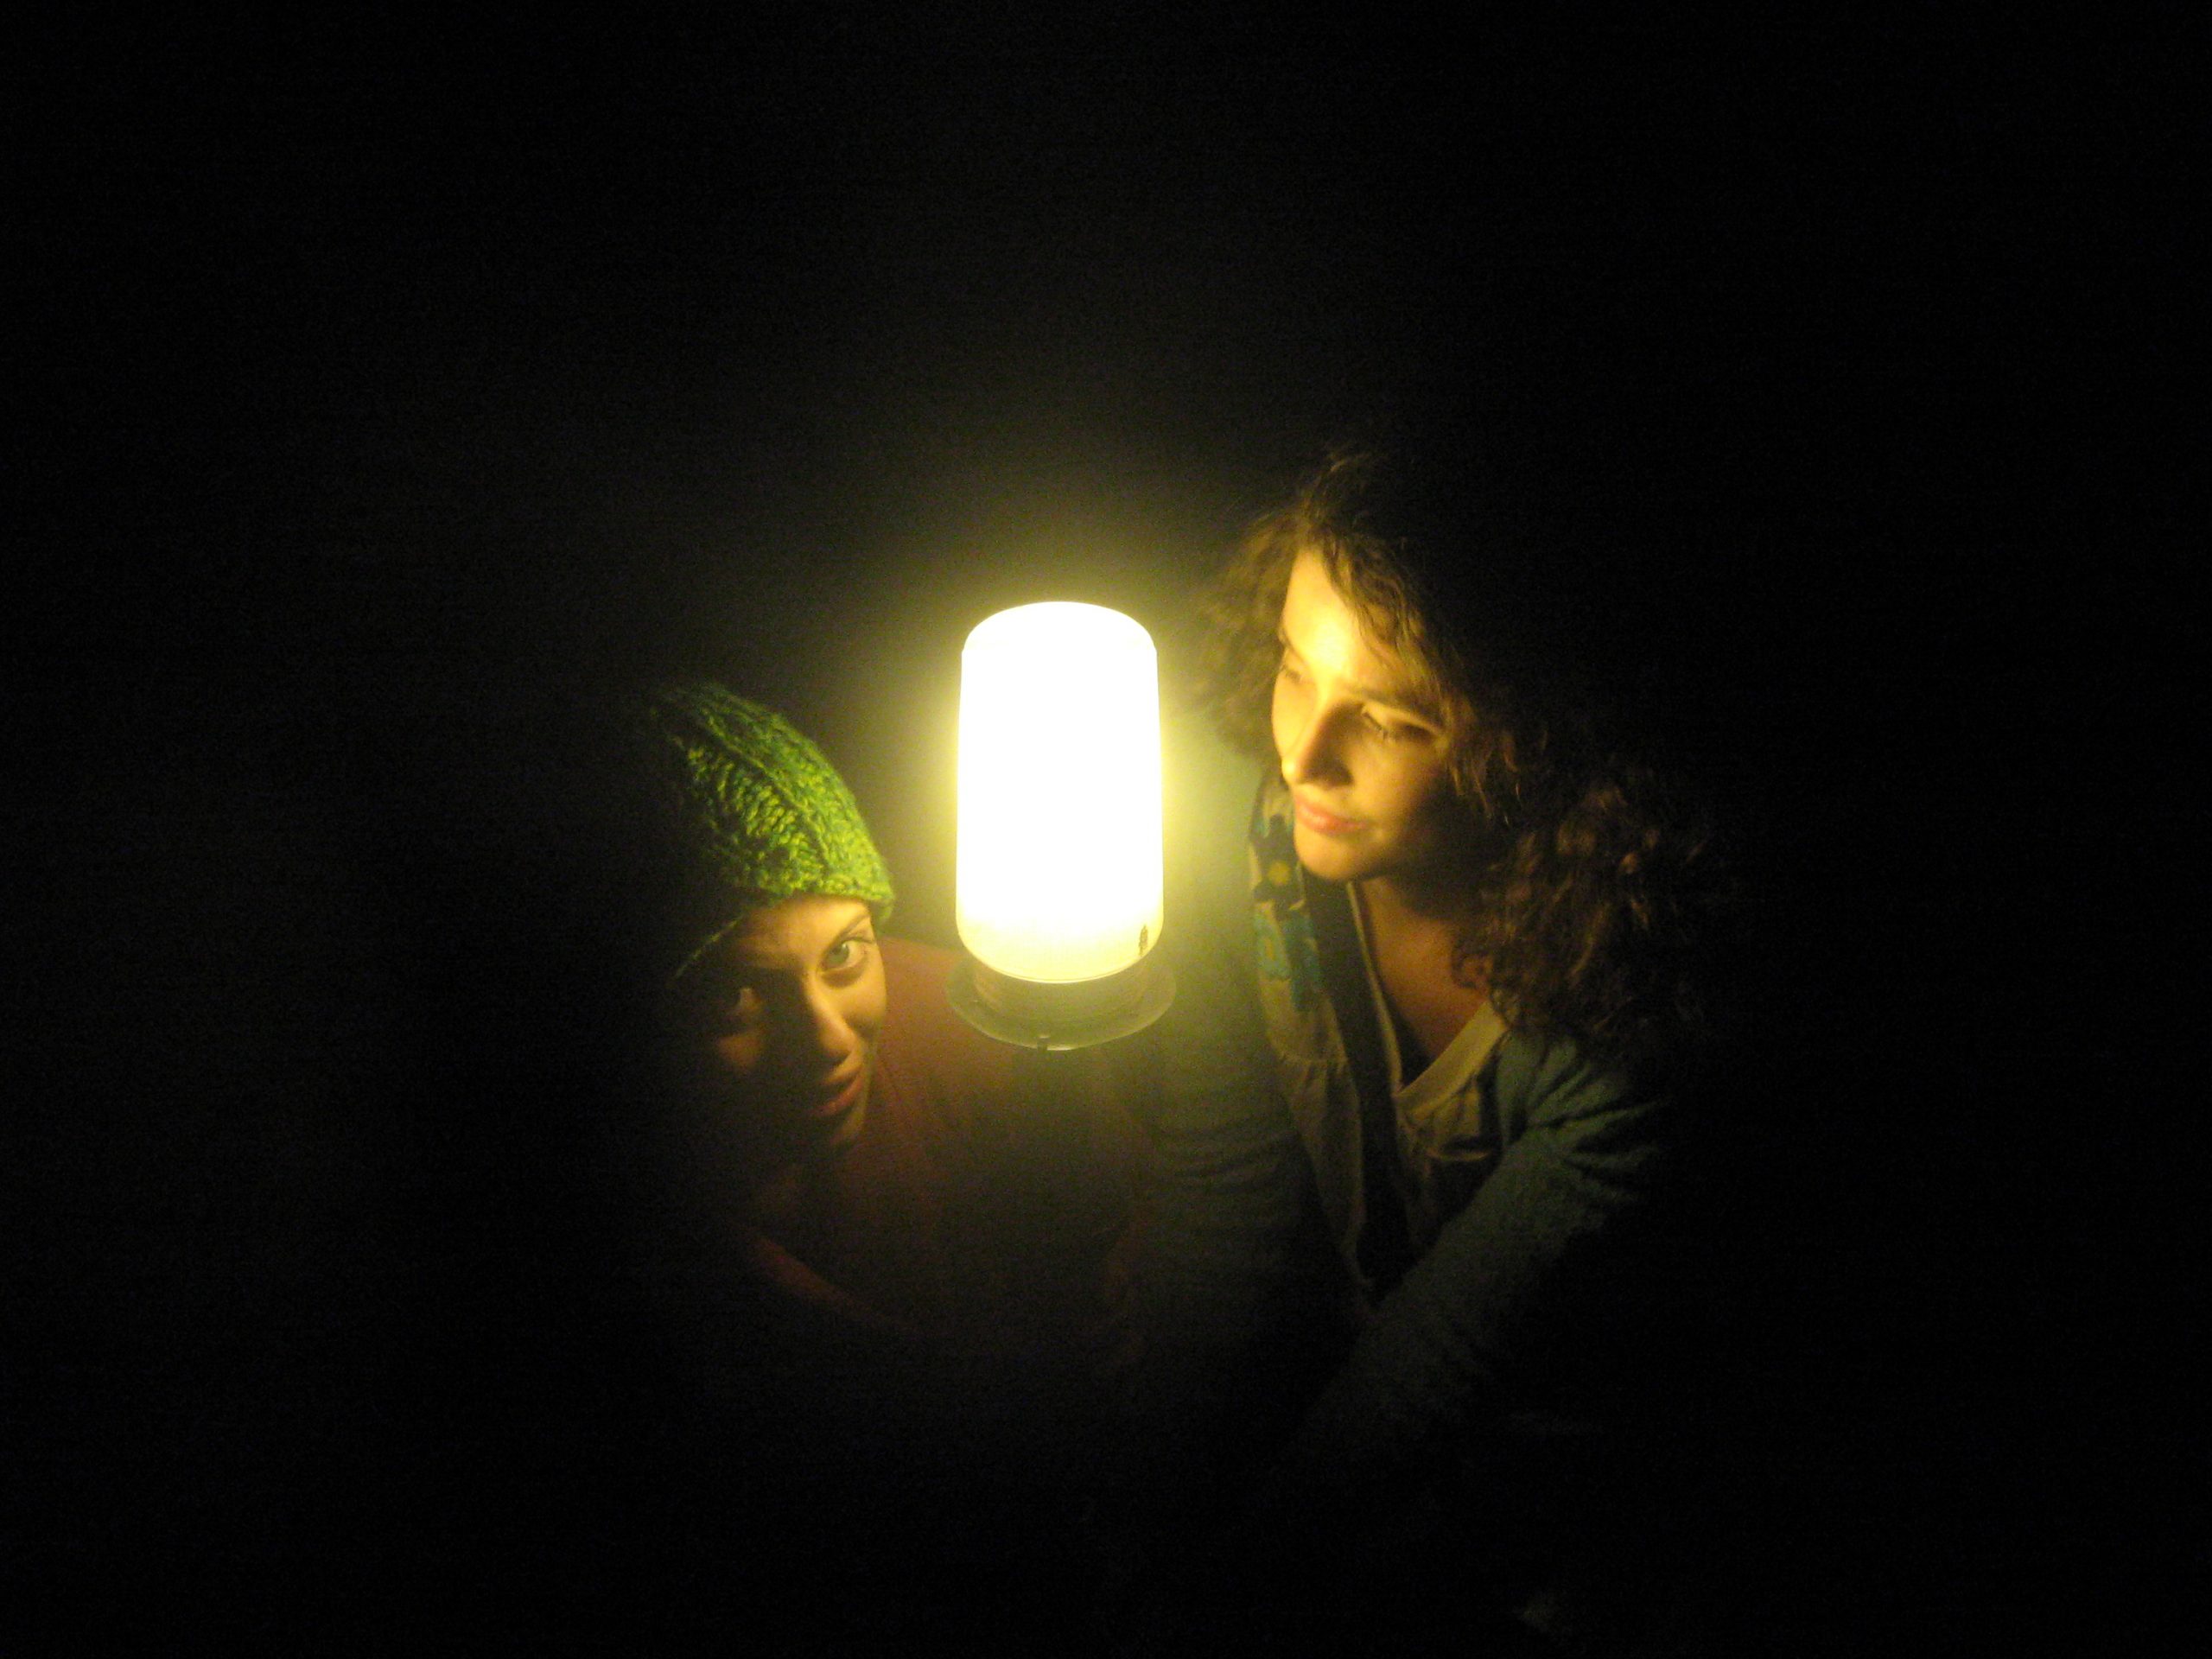 Natalie Hartman and Emily Kraybill pose with half of their faces illuminated by the ghost's light in Umble Center